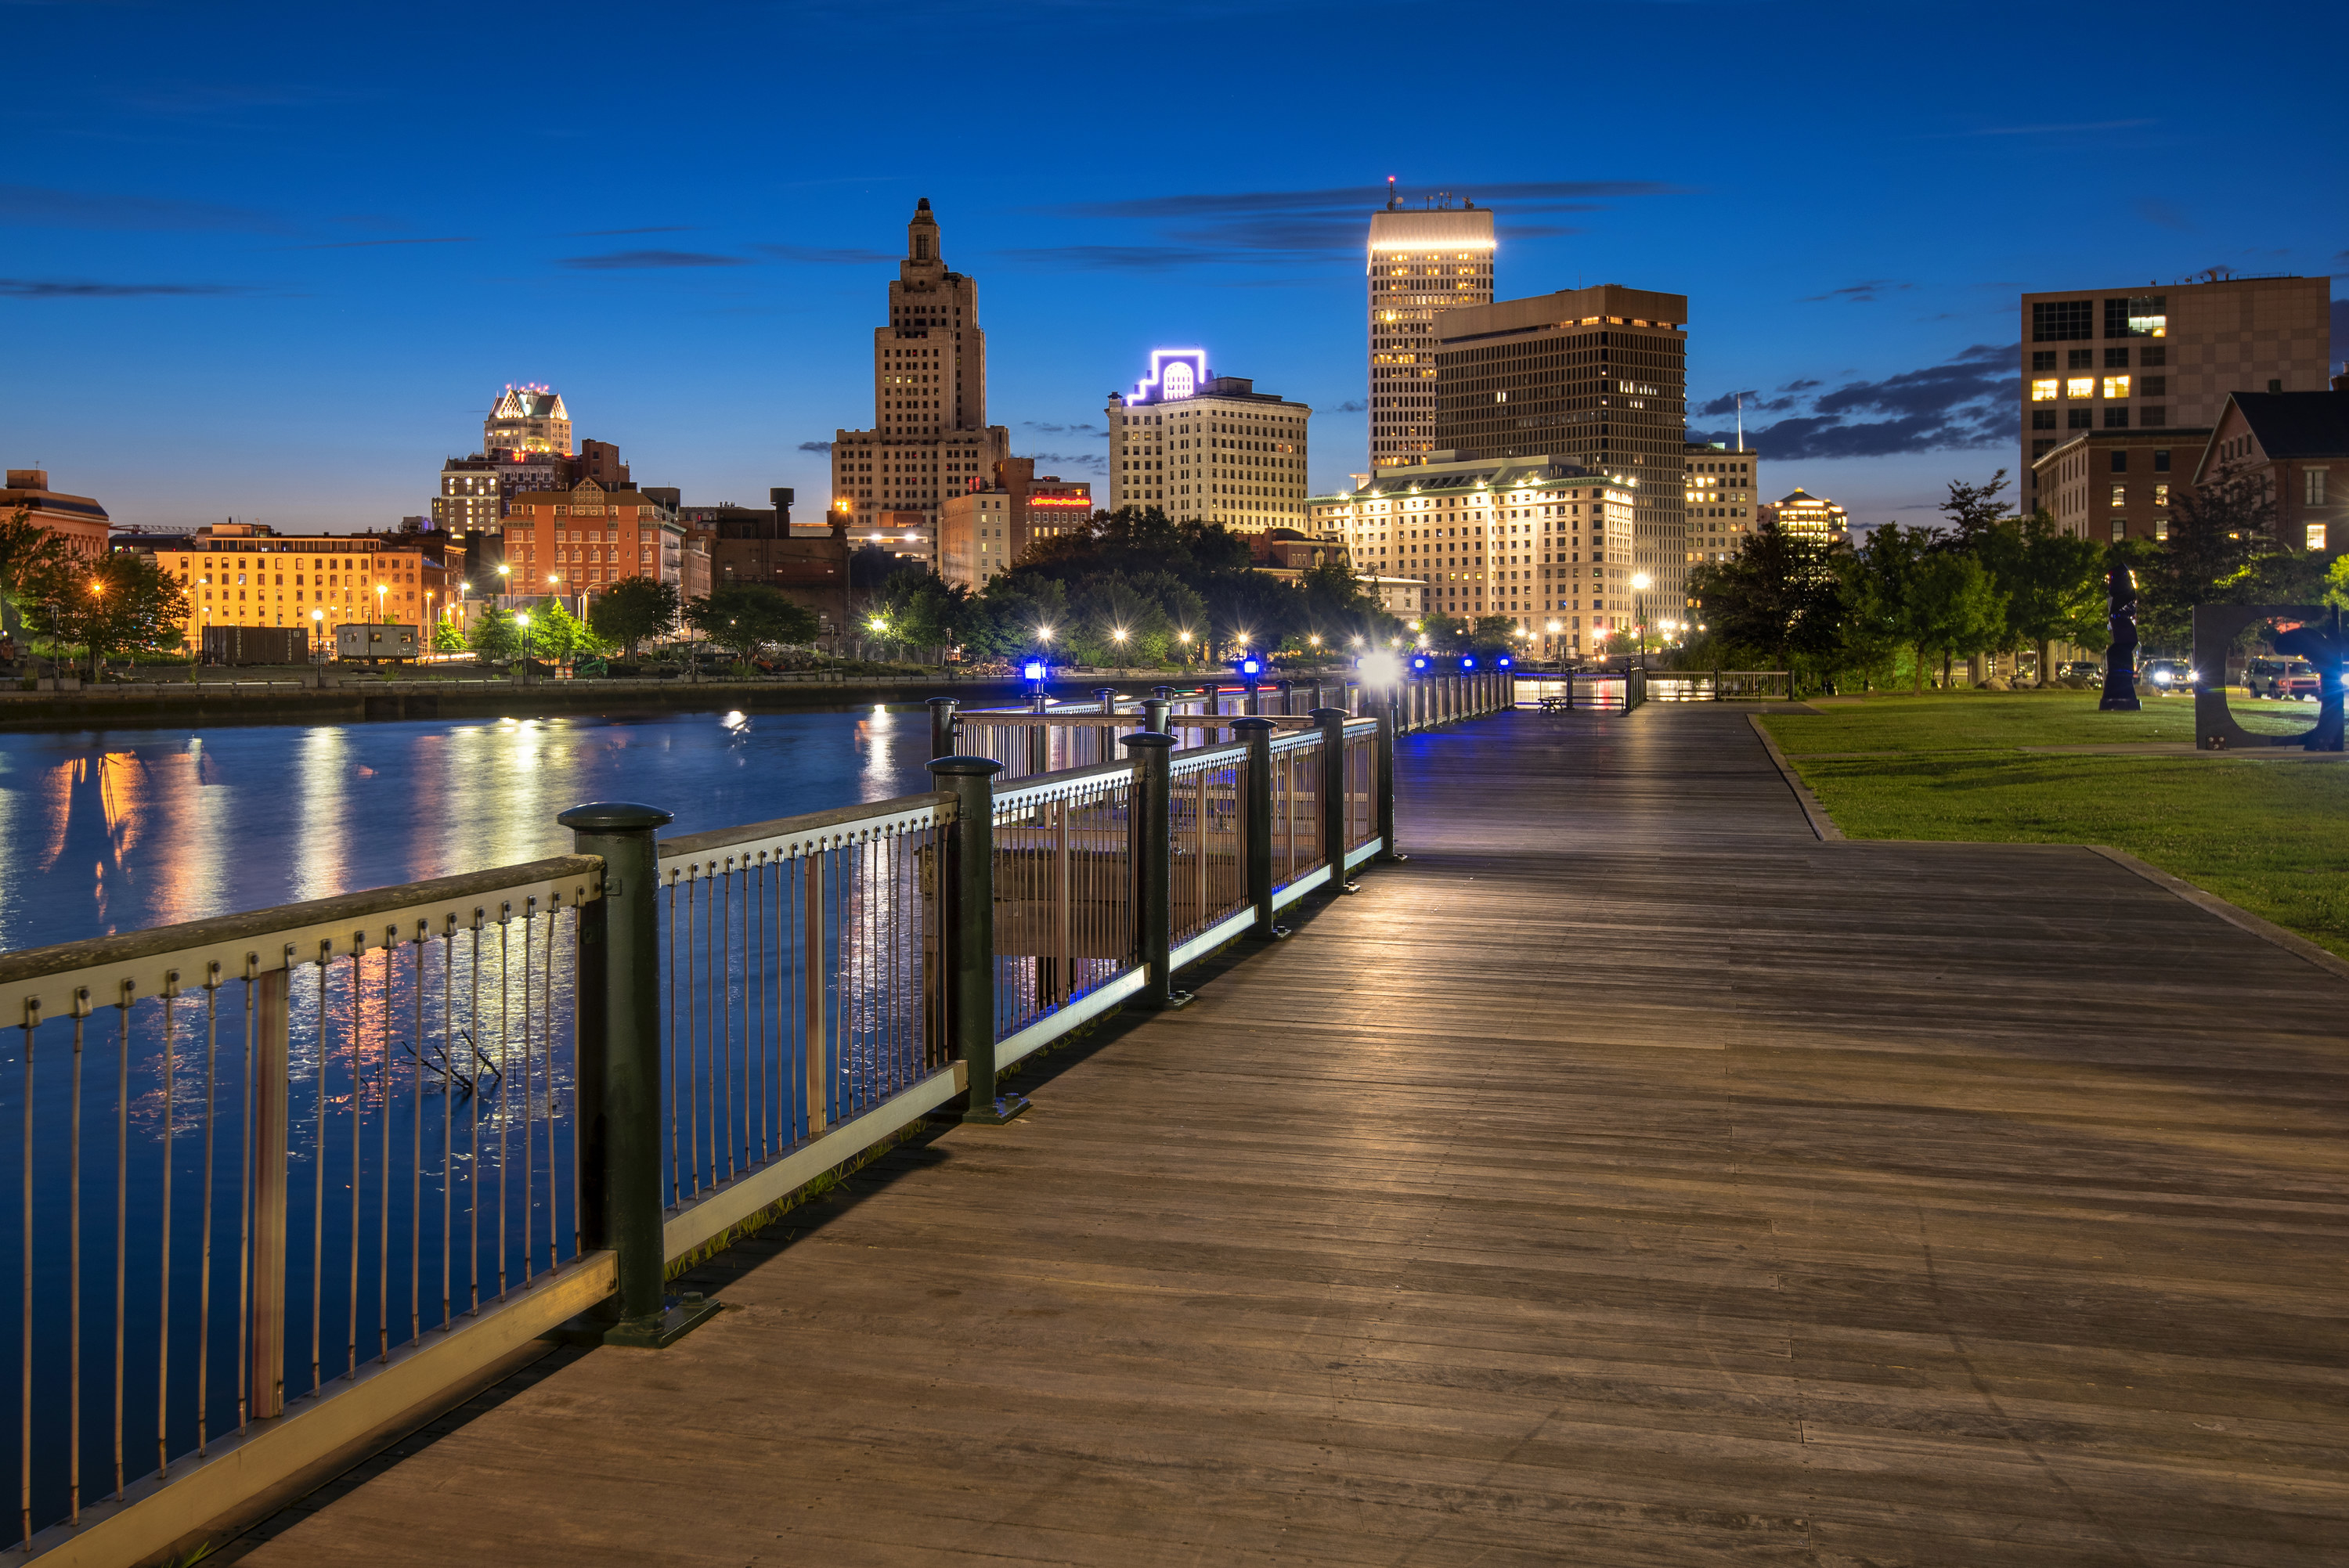 Night image of a city in Rhode Island